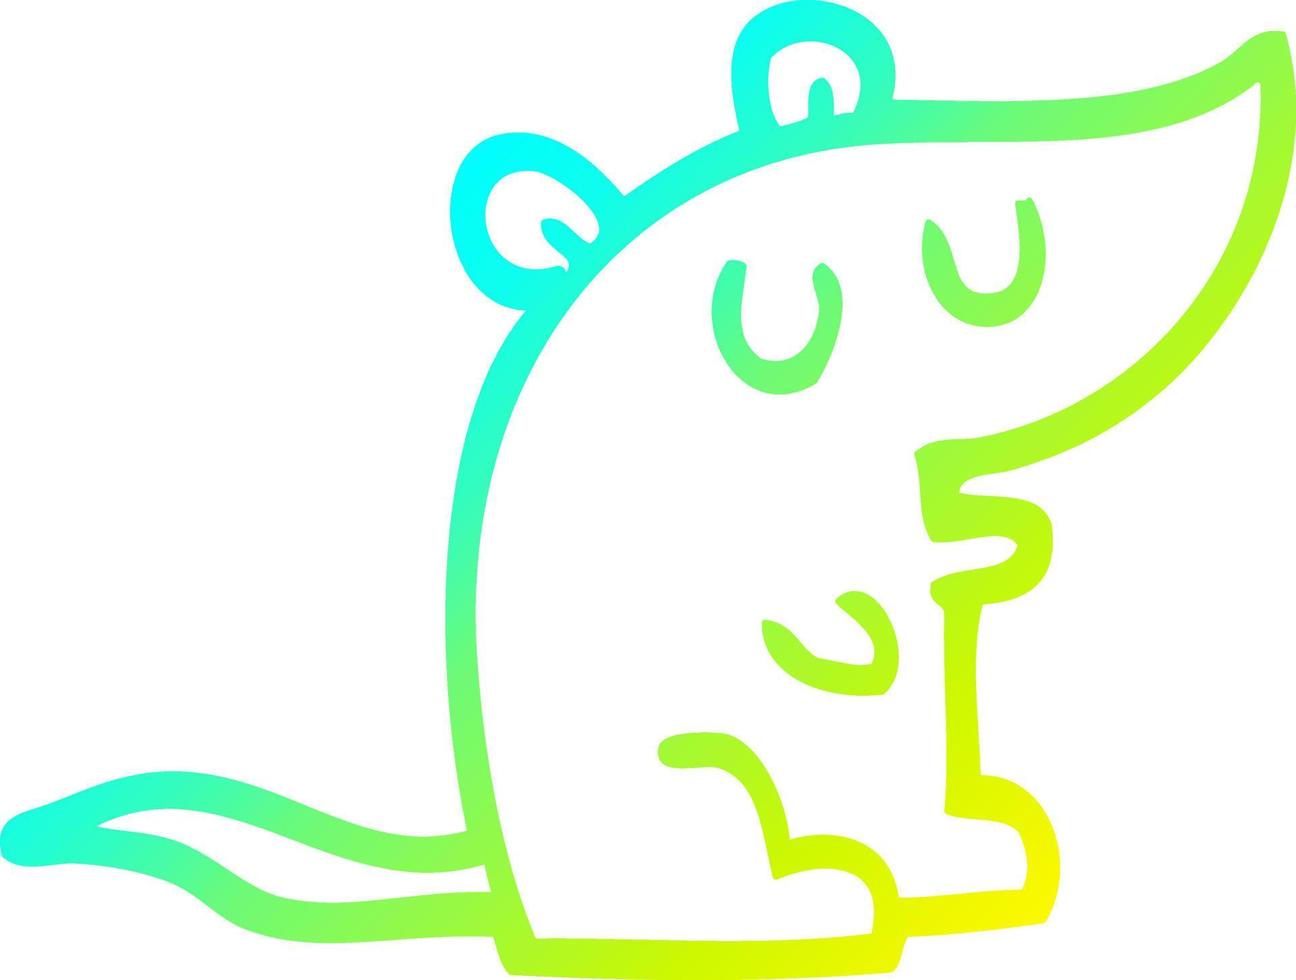 cold gradient line drawing cartoon mouse vector